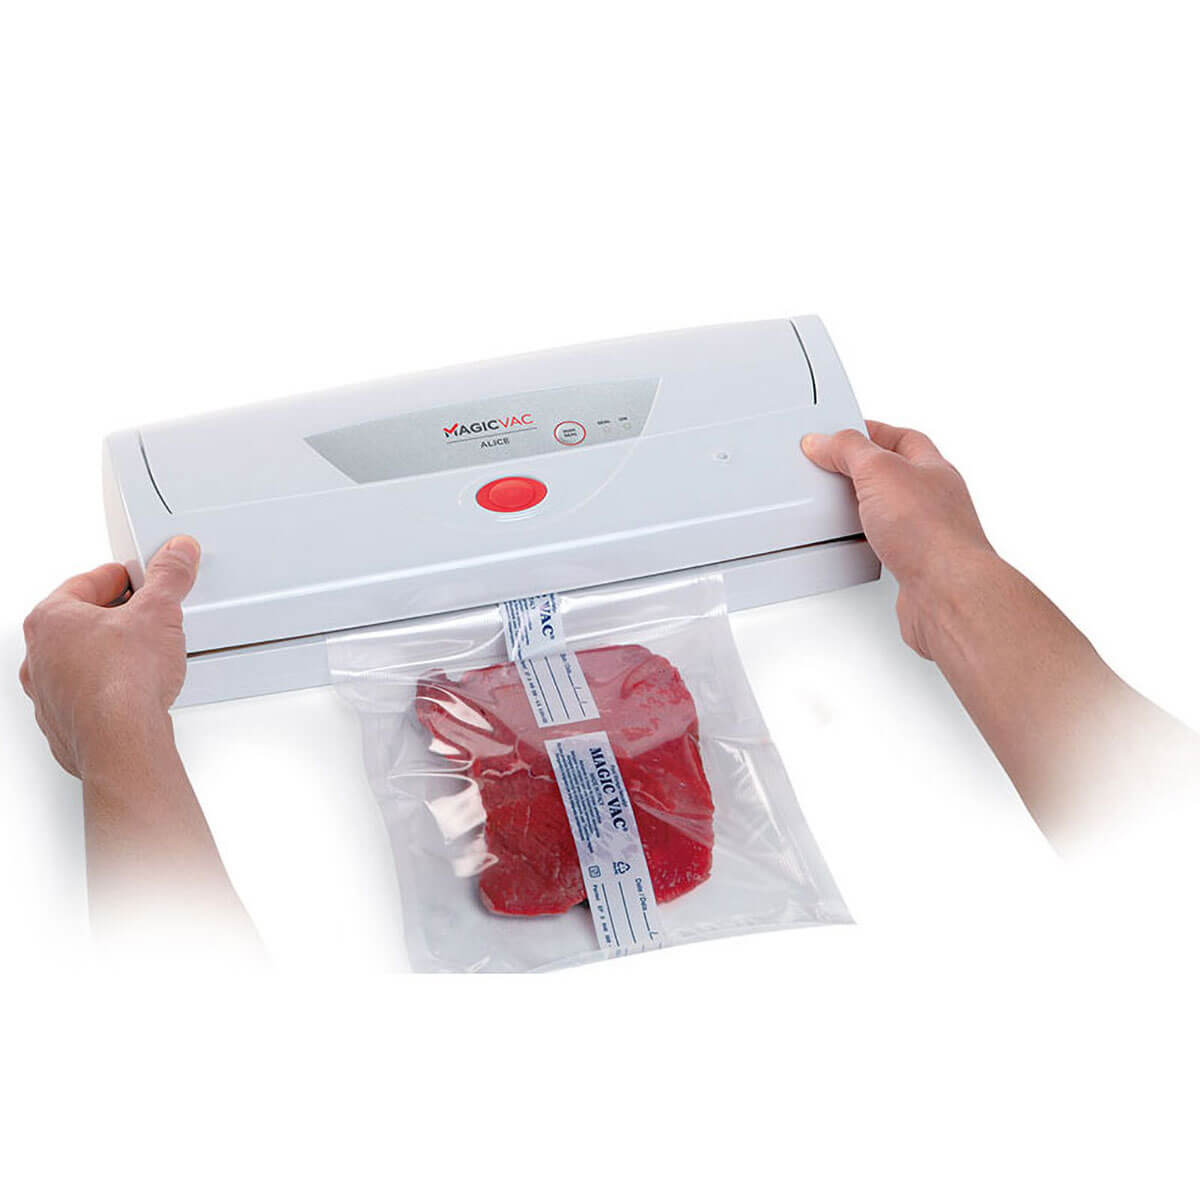 Magic Vac Alice vacuum packing system with lid closed, preparing to begin the vacuum packing process.